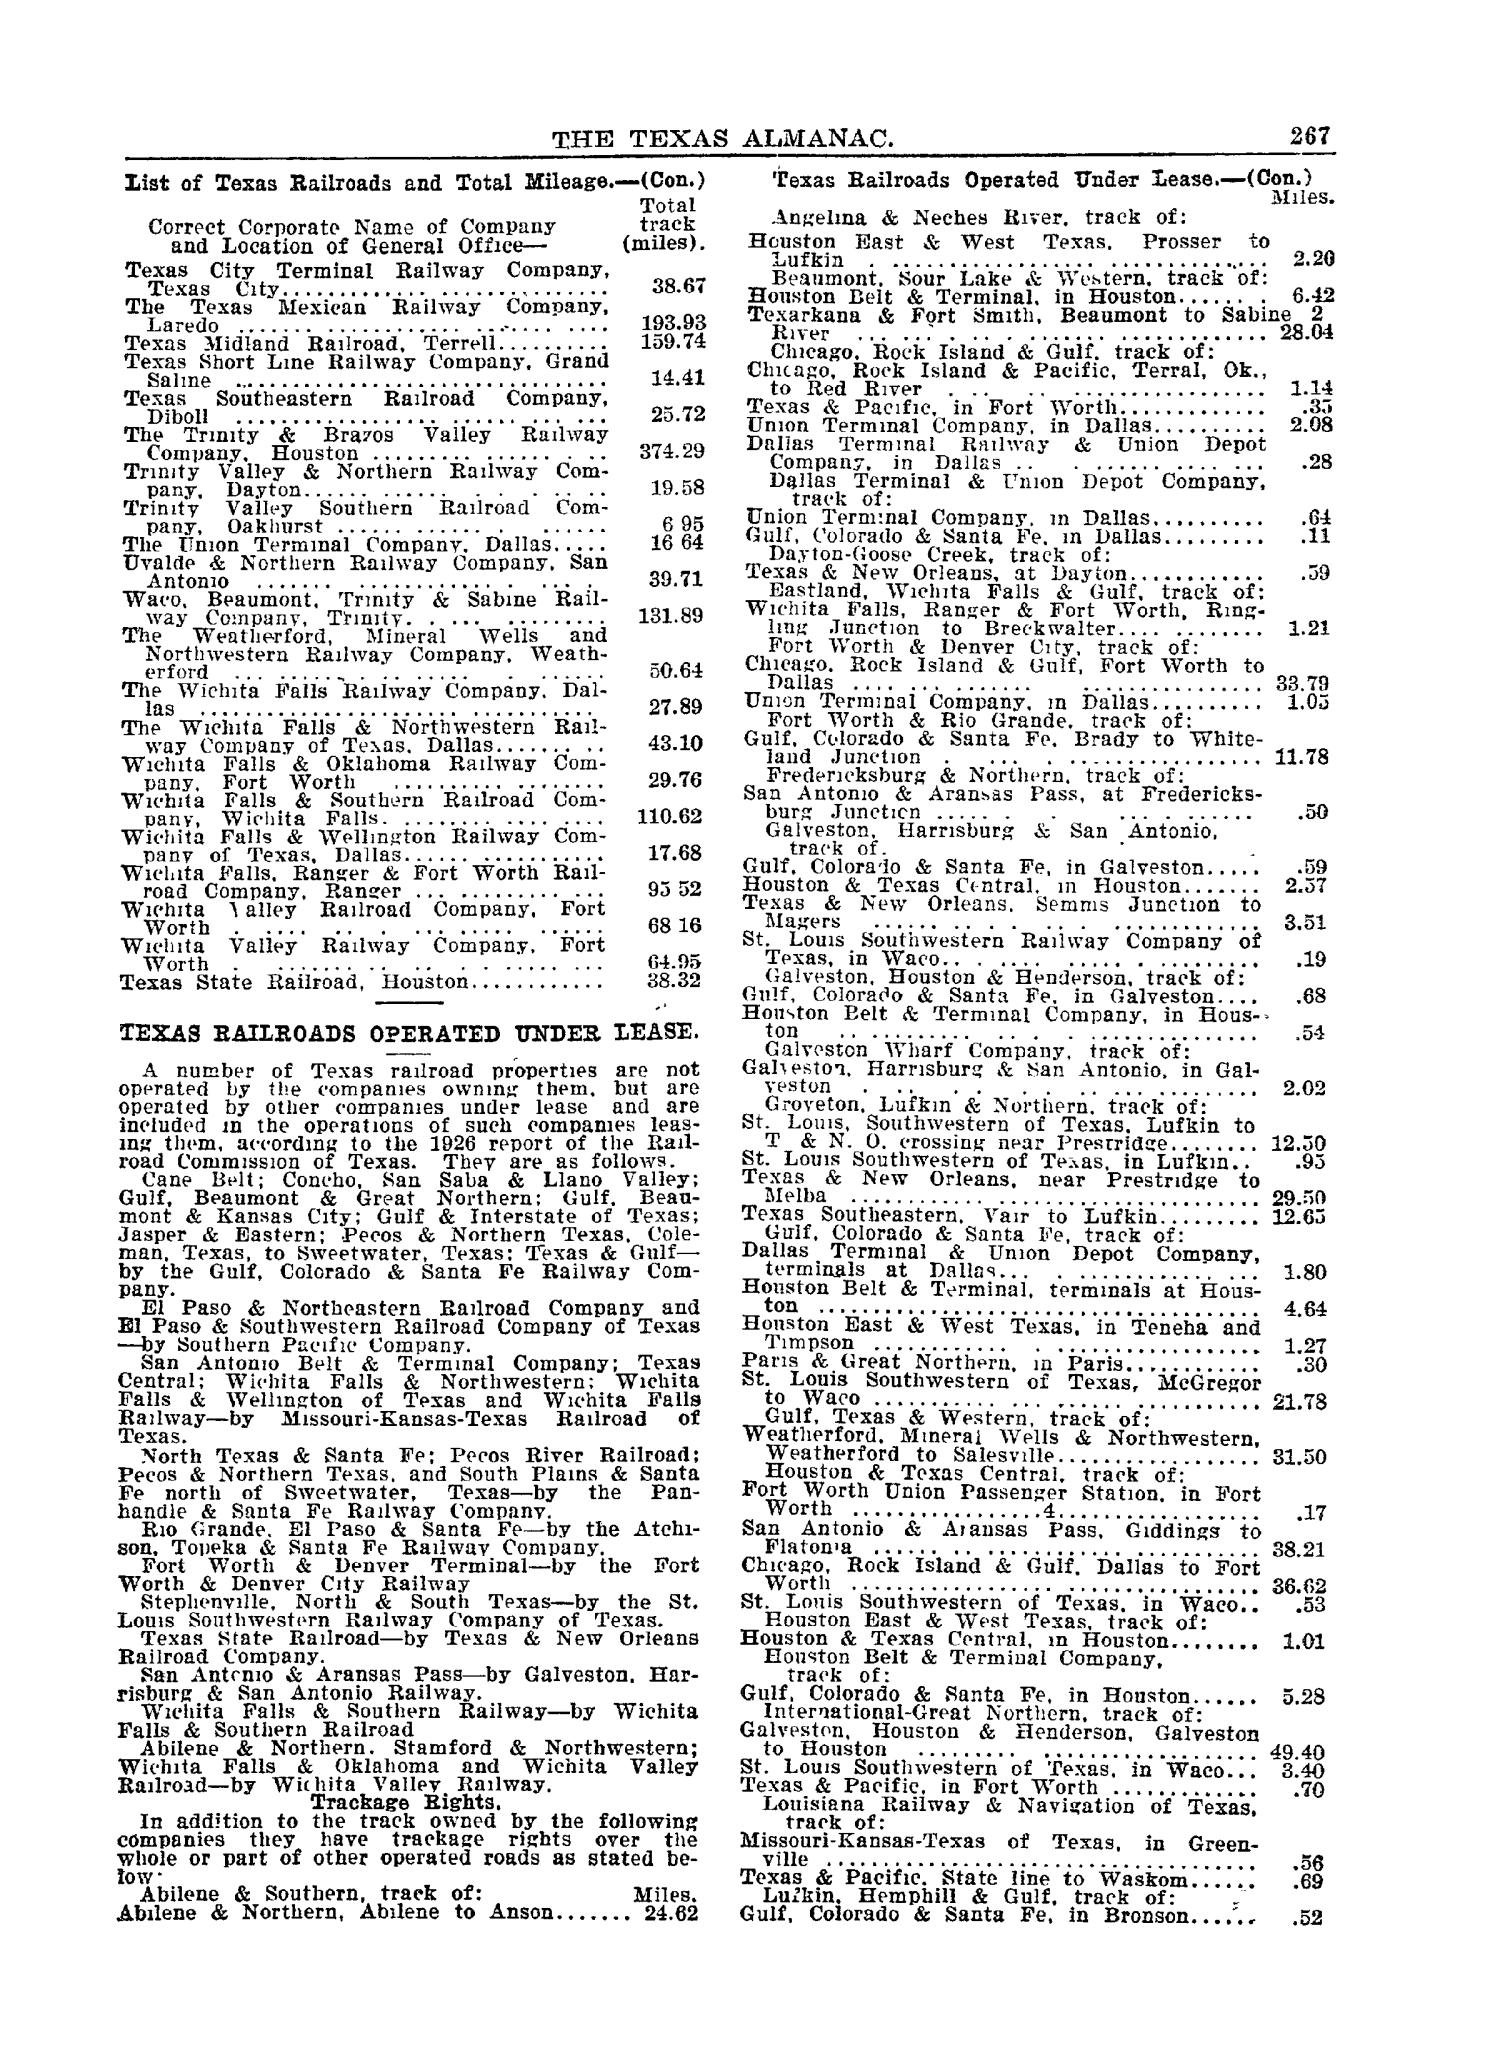 1927 The Texas Almanac and State Industrial Guide
                                                
                                                    267
                                                